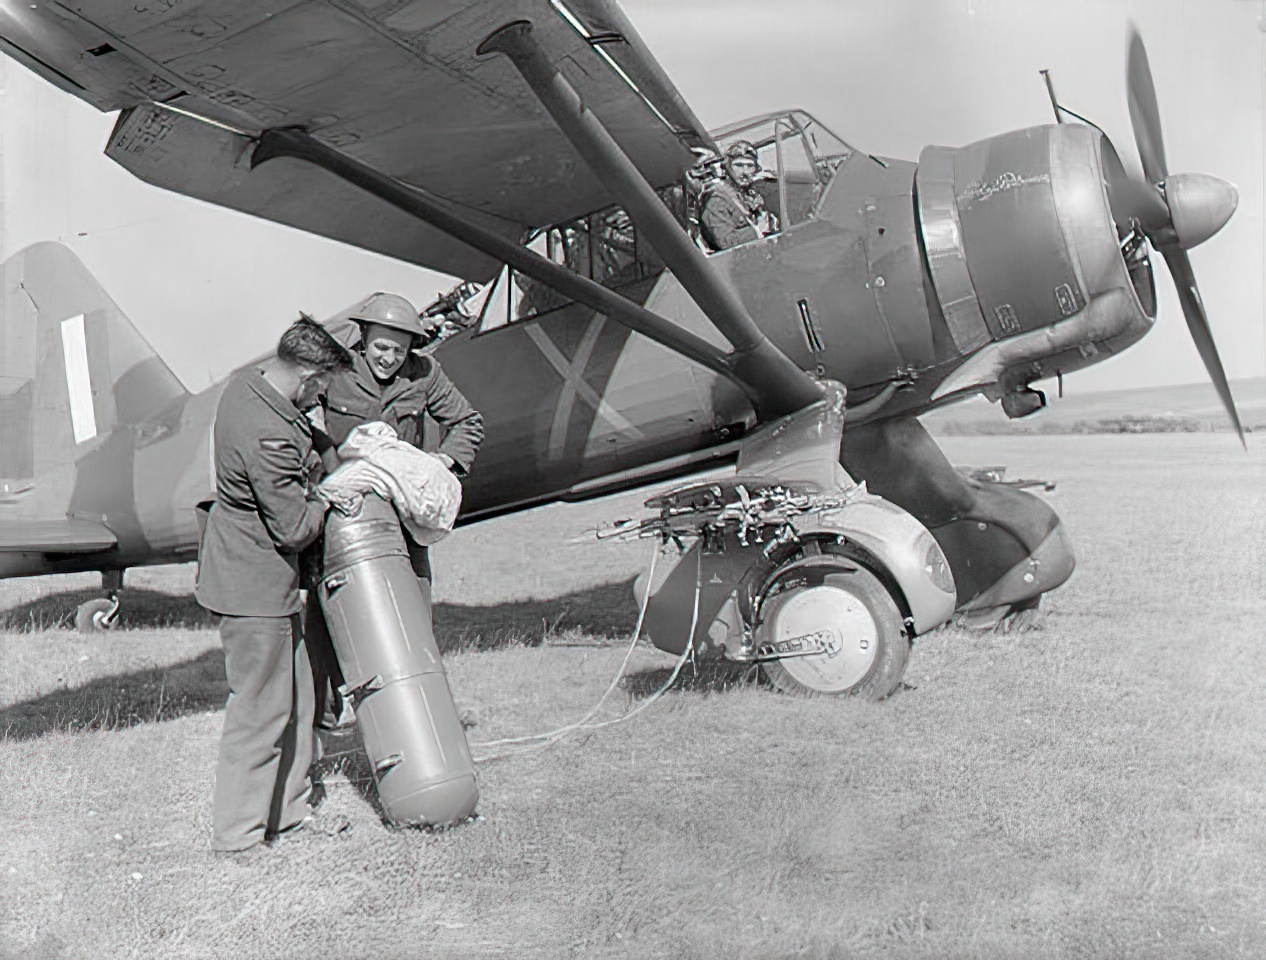 No. 22 (army Co-operation) Group, Royal Air Force, June-november 1940. Groundcrew pack a parachute into a supply dropper before fitting it to the stub winglets of a Westland Lysander Mark II of No. 225 Squadron RAF at Tilshead, Wiltshire